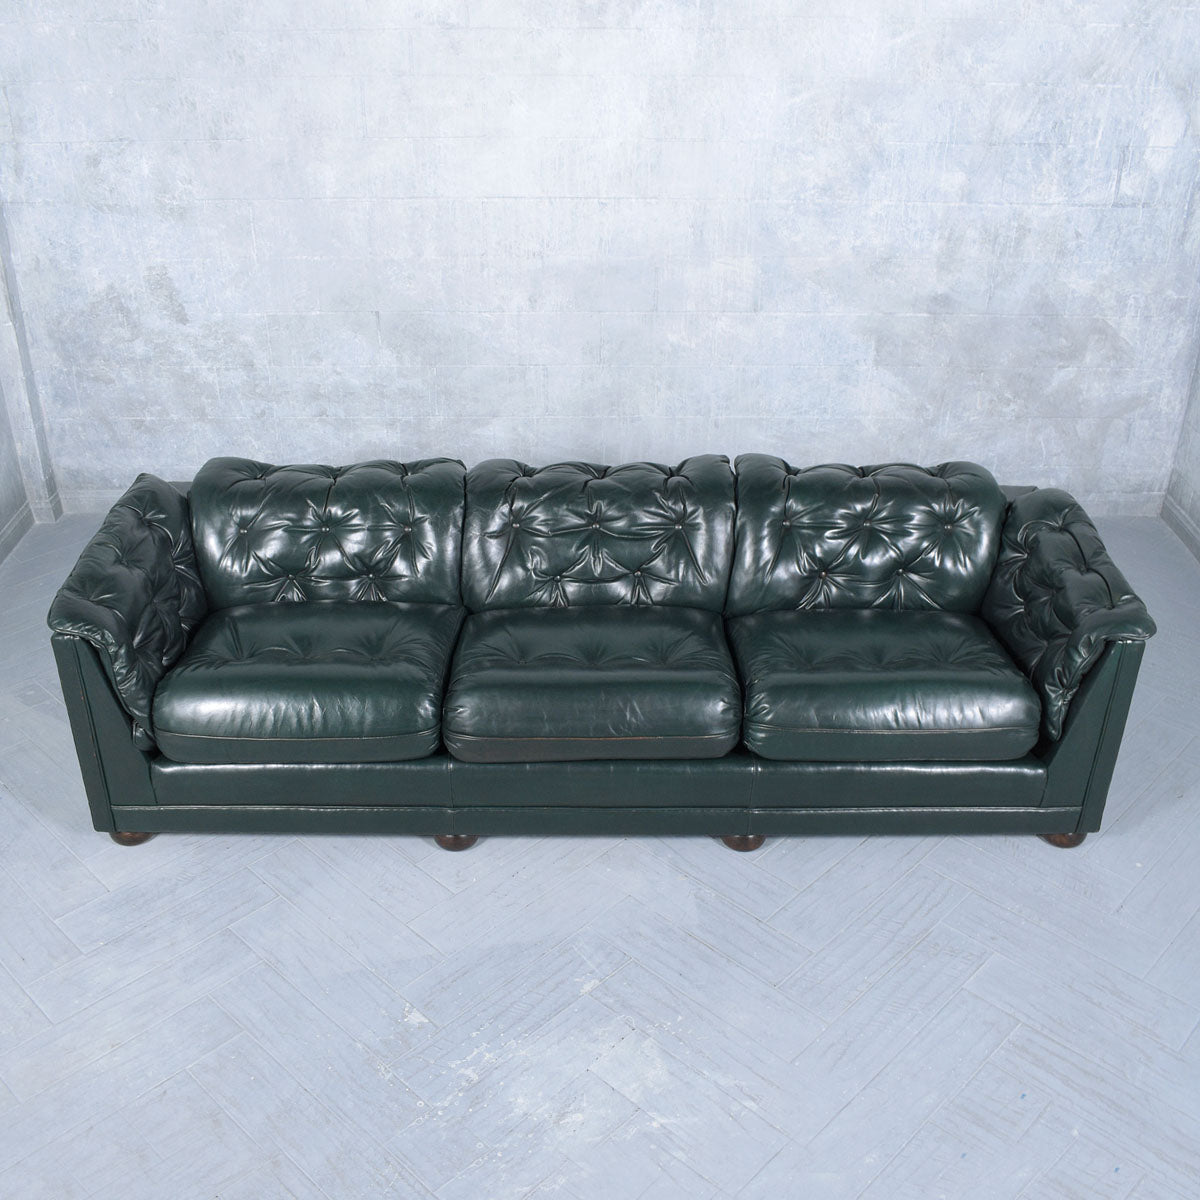 Vintage 1960s Green Tufted Chesterfield Leather Sofa